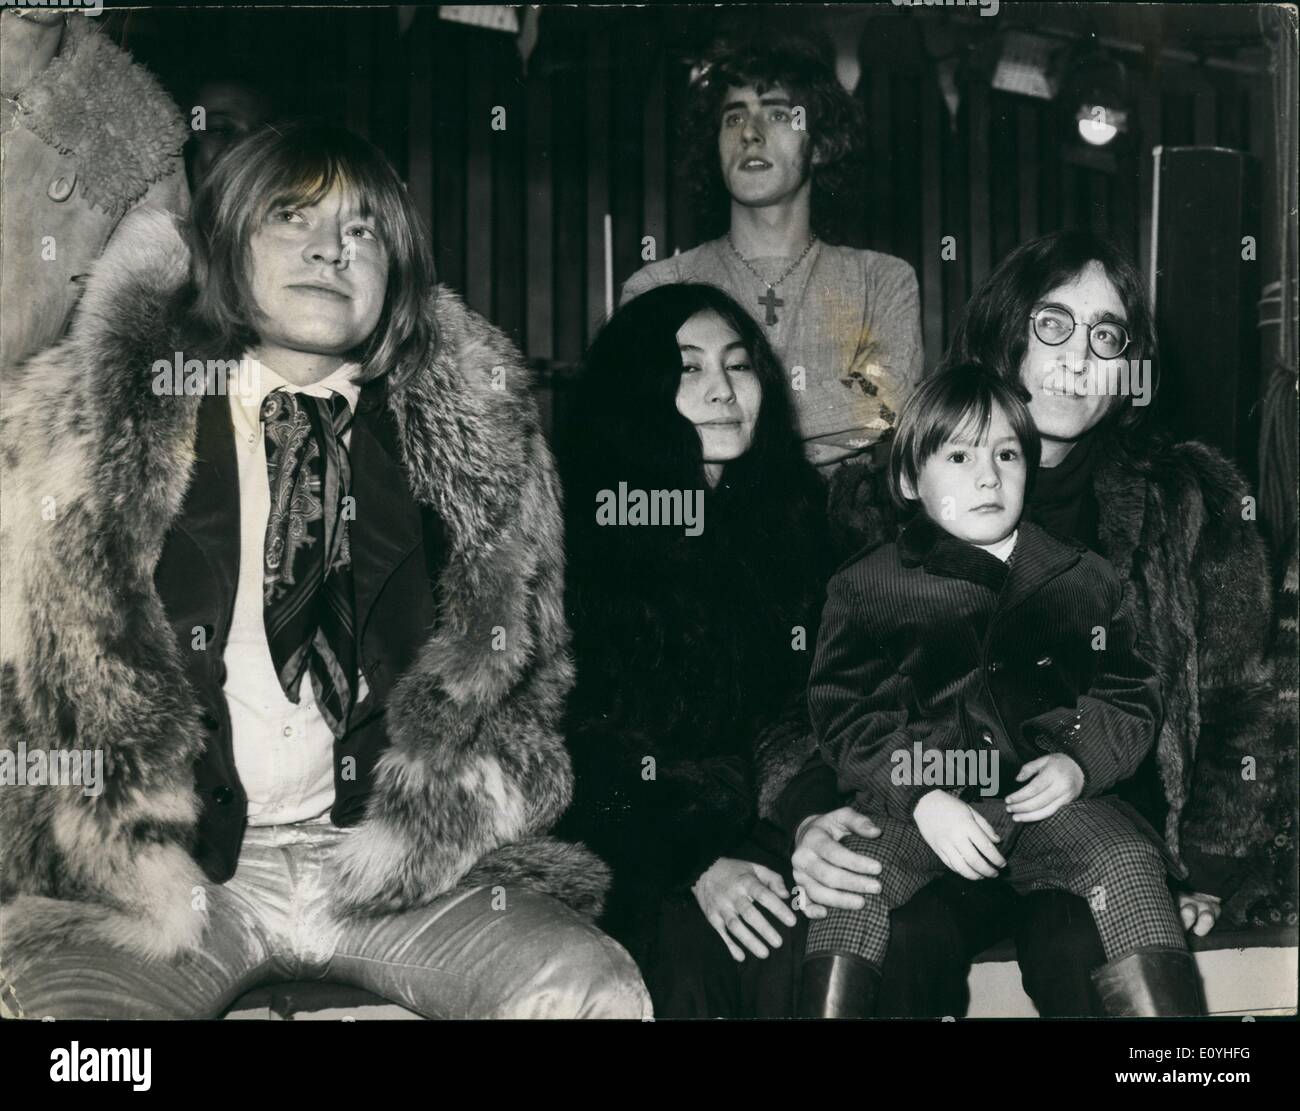 Jun. 06, 1970 - 'Stones' Circus for T.V.: The World's most contrversial pop group, 'The Rolling Stones' are to produce their own television spectacular, tentatively titled ''Rolling Stones' Rock 'n' Roll Circus Shows. The show, which will be televised early nest year, will feature the Rolling Stones, many top popstars - and clowns, animals and dwarfs from Sir Robert Fossett's Circus. The show is being filmed at Internet Studios, Wembly. Watching circus acts as the Intertel Studios - (L. to R.) Brian Jones, of the Rolling Stones, Yoko Ono, and John Lennon, with his son Julian. Stock Photo